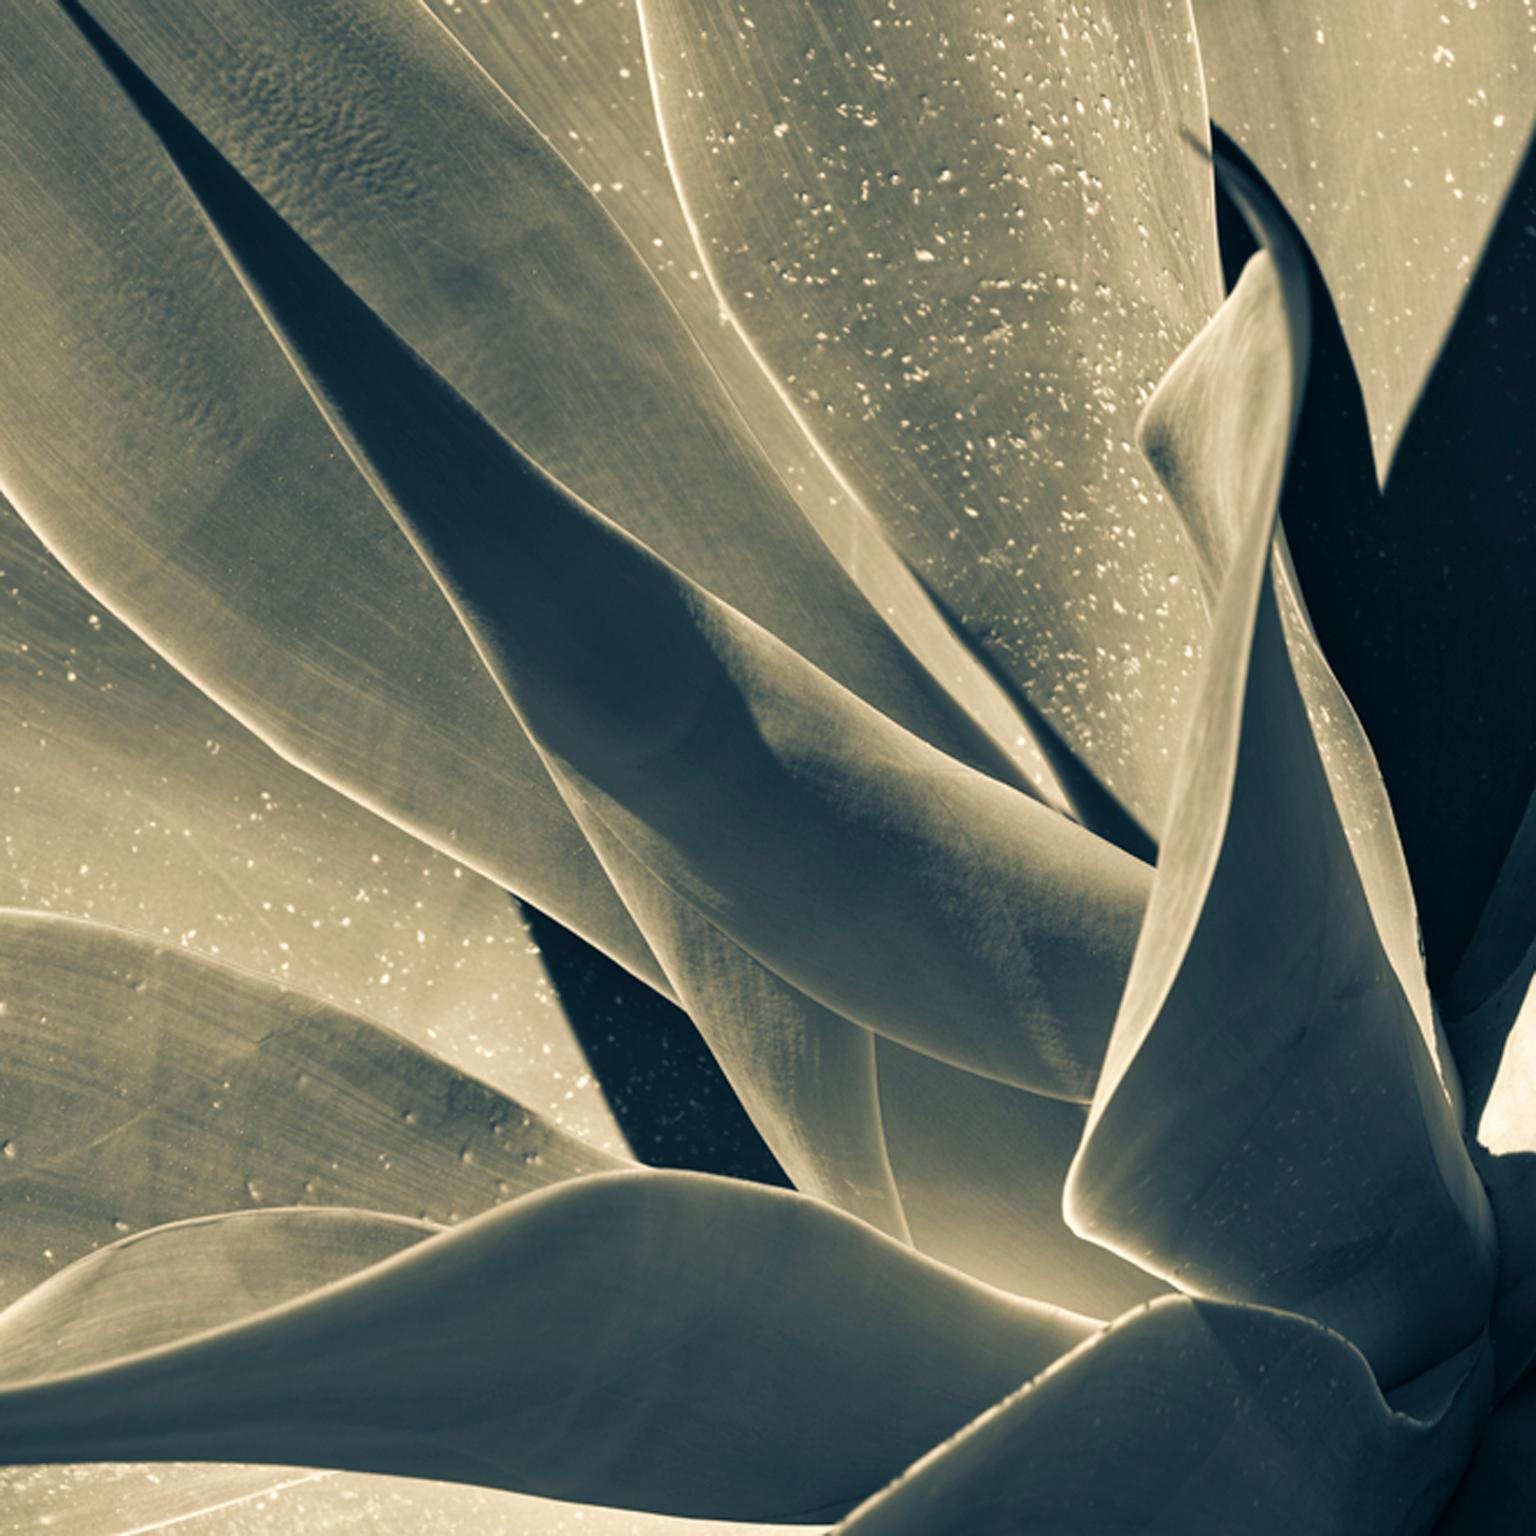 Yucca, Agrigento, Sicily - Photograph by Cosmo Condina